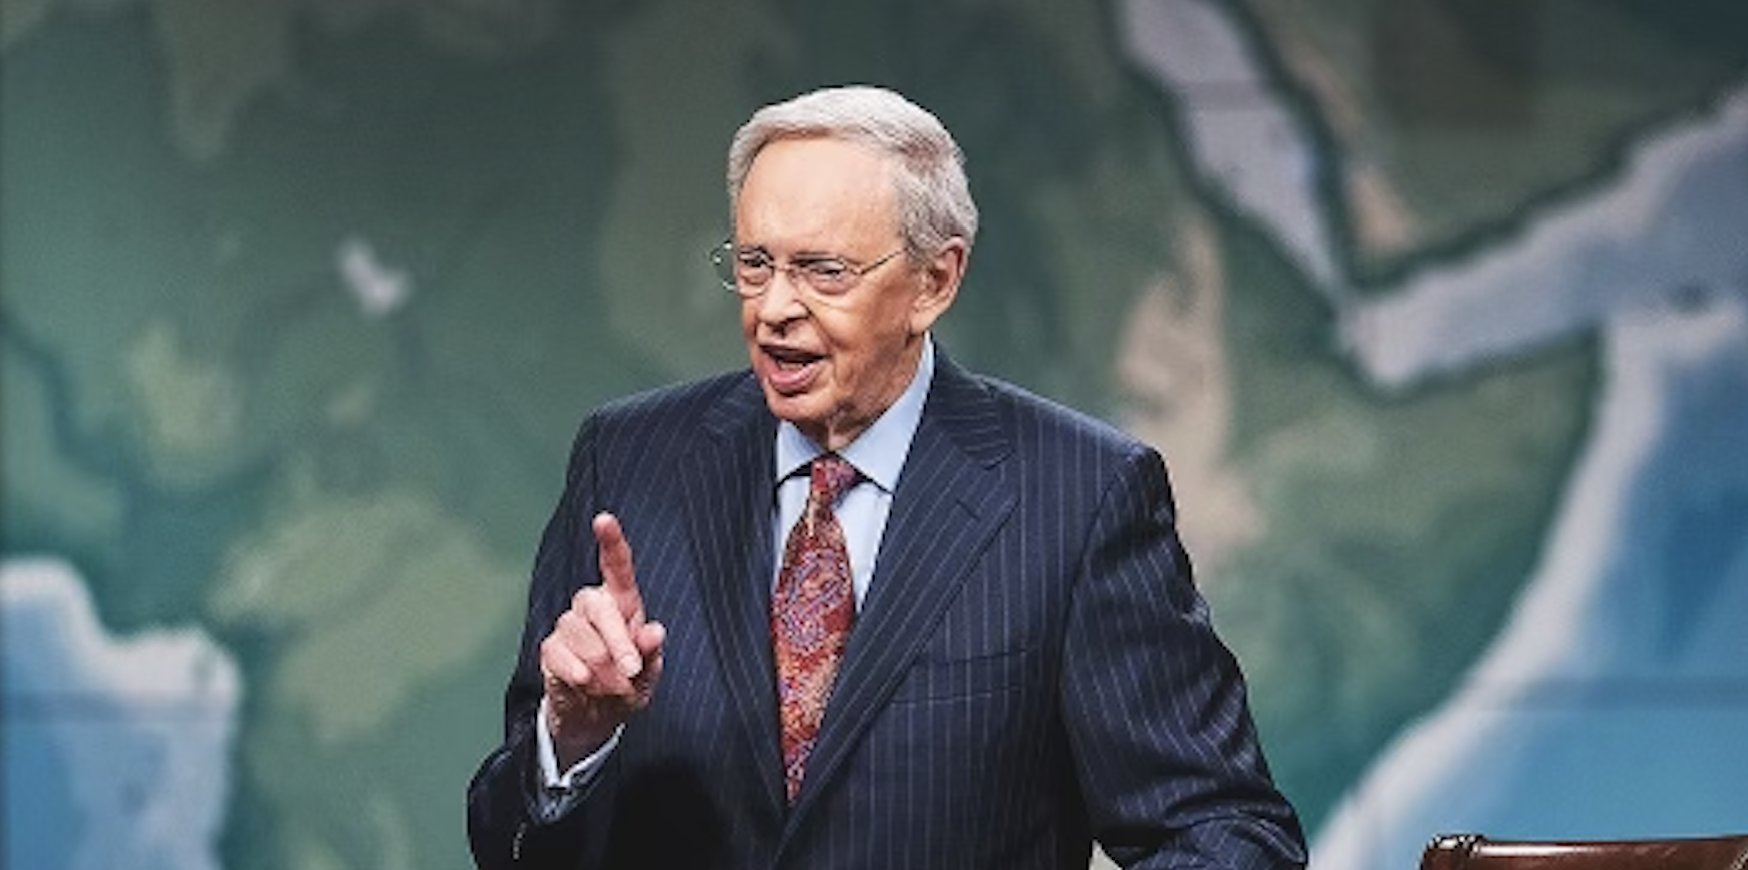 BREAKING: Prominent Church Leader, Dr. Charles Stanley Dies At 90